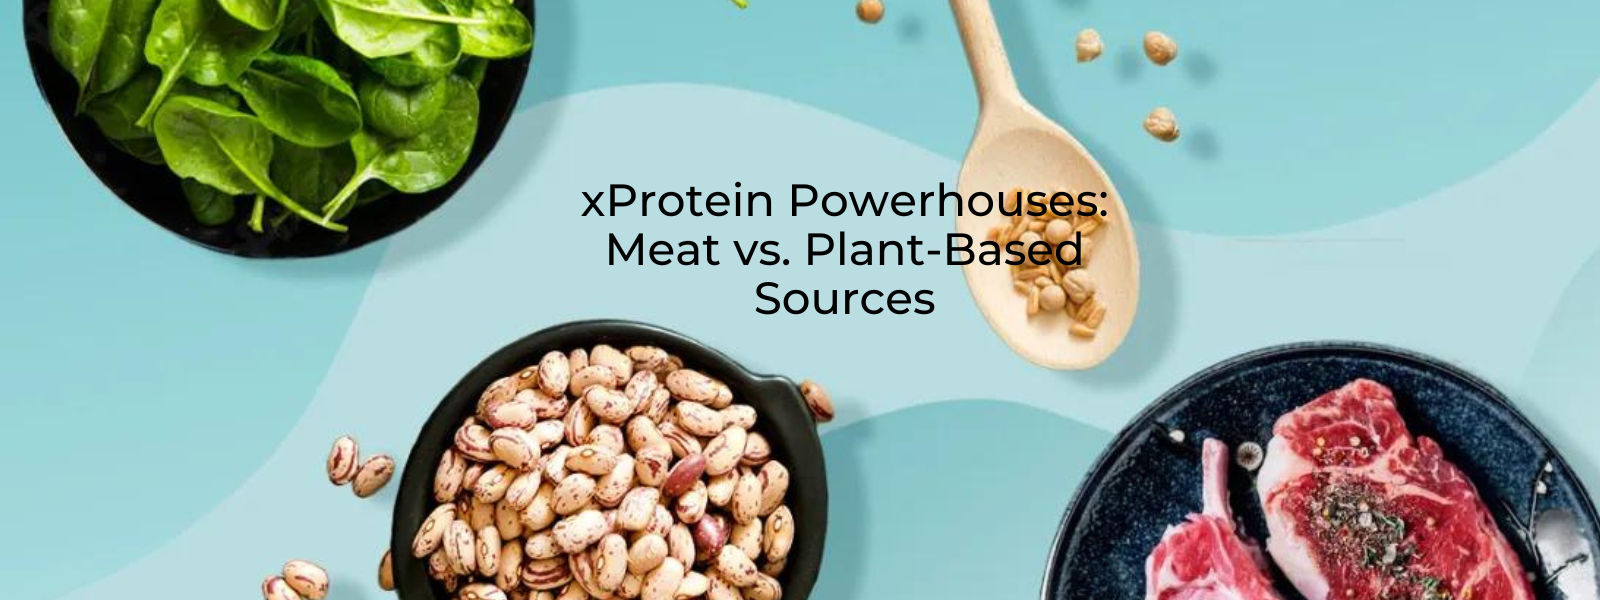 Protein Powerhouses: Meat vs. Plant-Based Sources